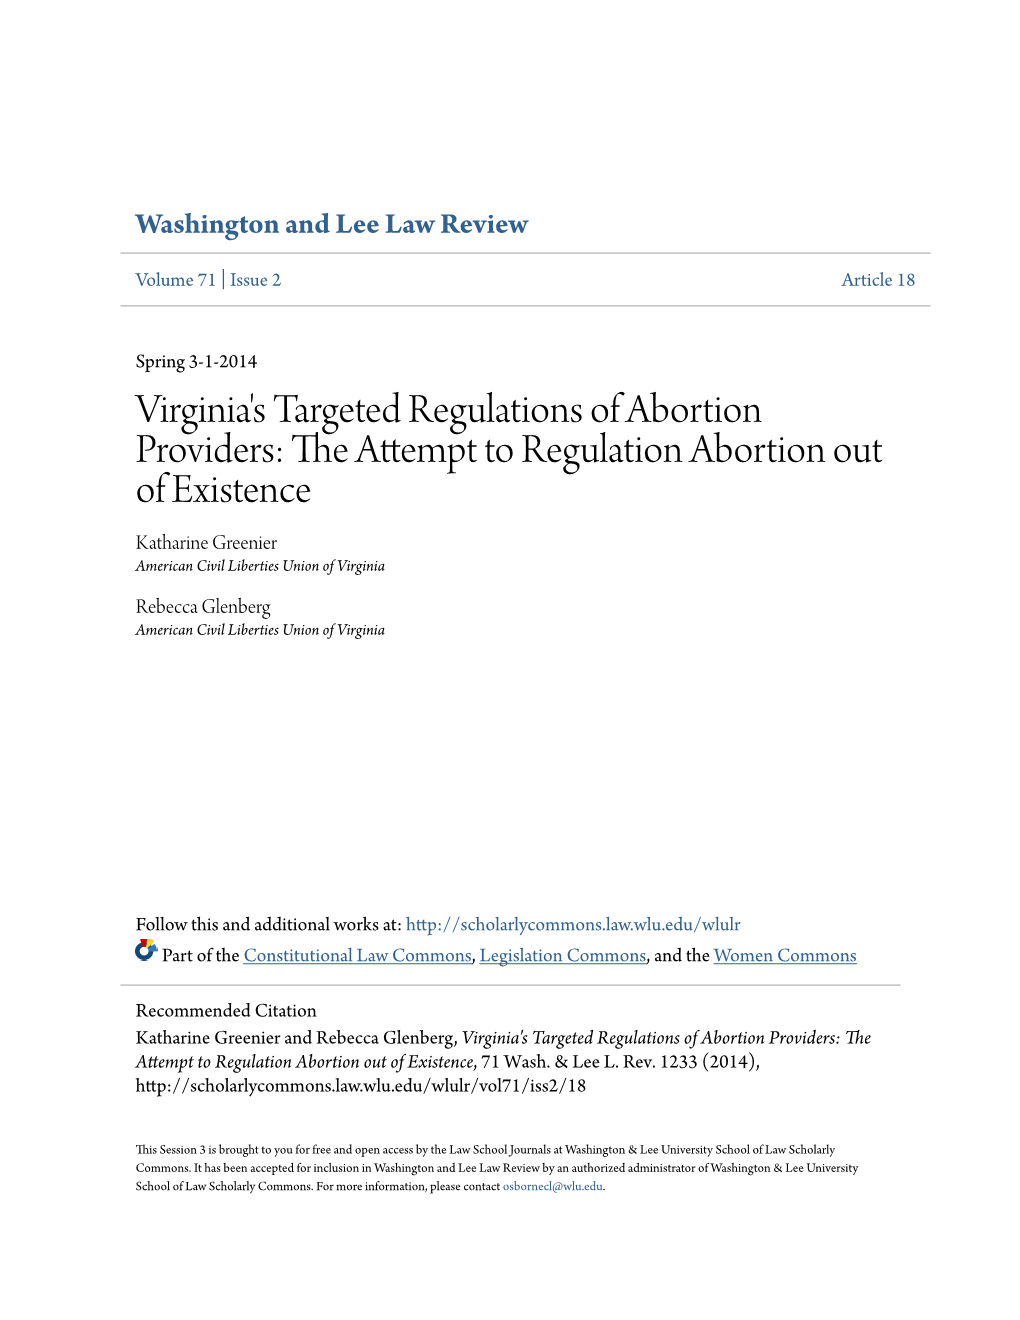 Virginia's Targeted Regulations of Abortion Providers